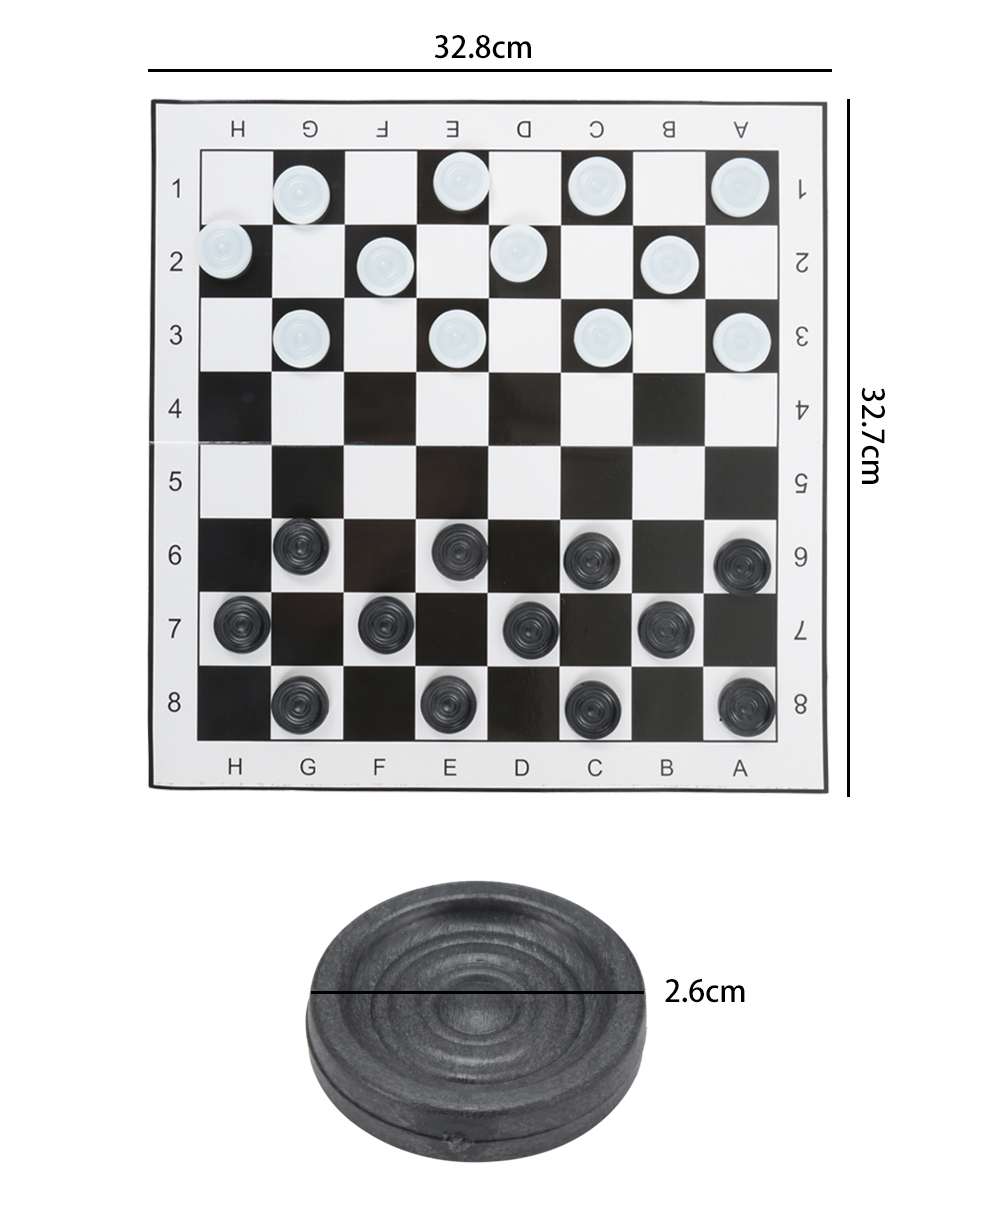 Plastic Draughts Checkers Set with Foldable Board for Entertainment